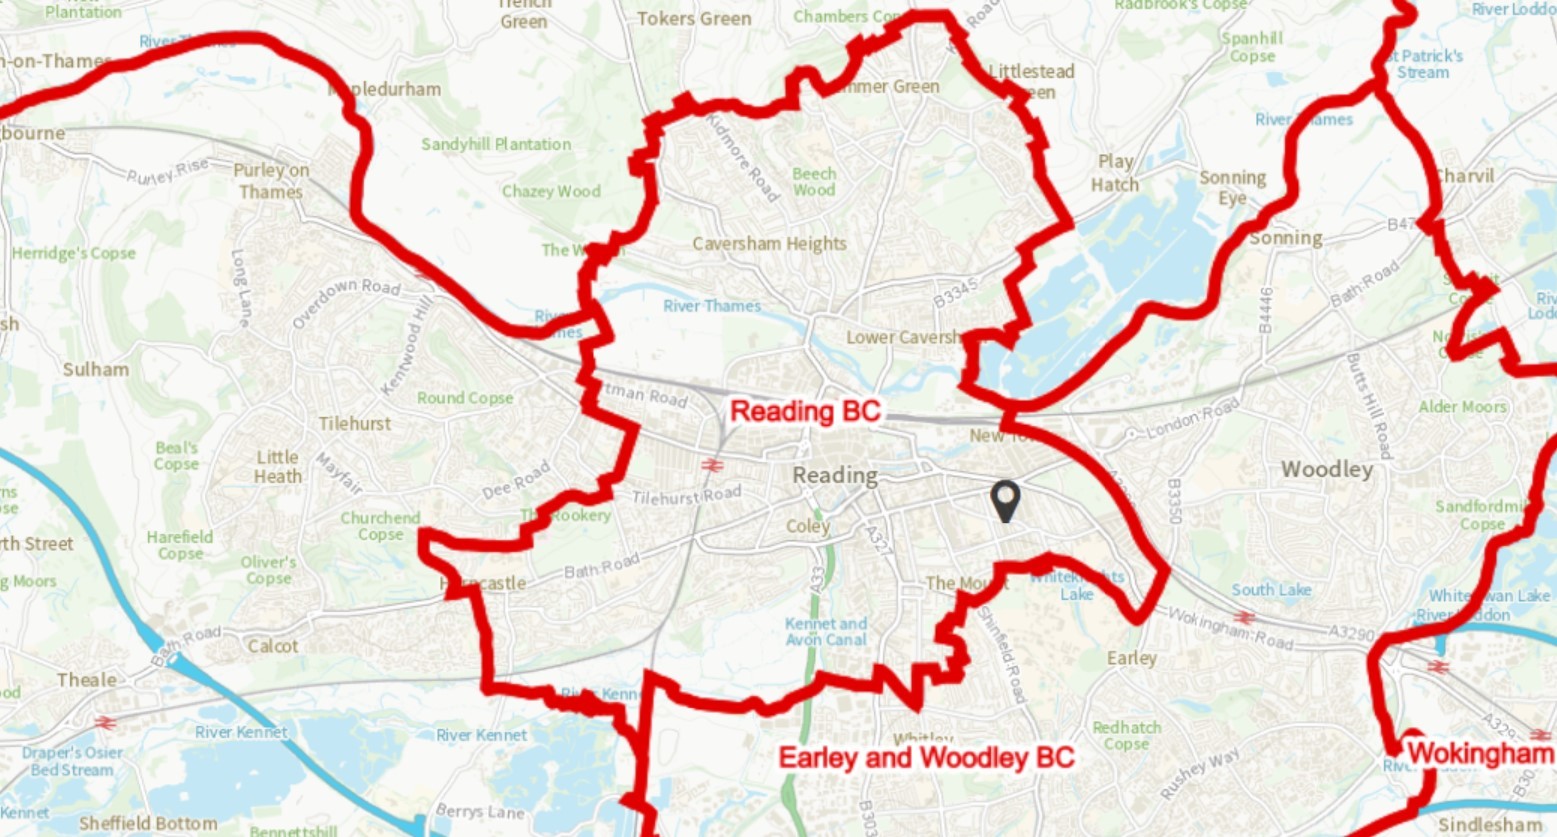 The new proposed Reading constituency